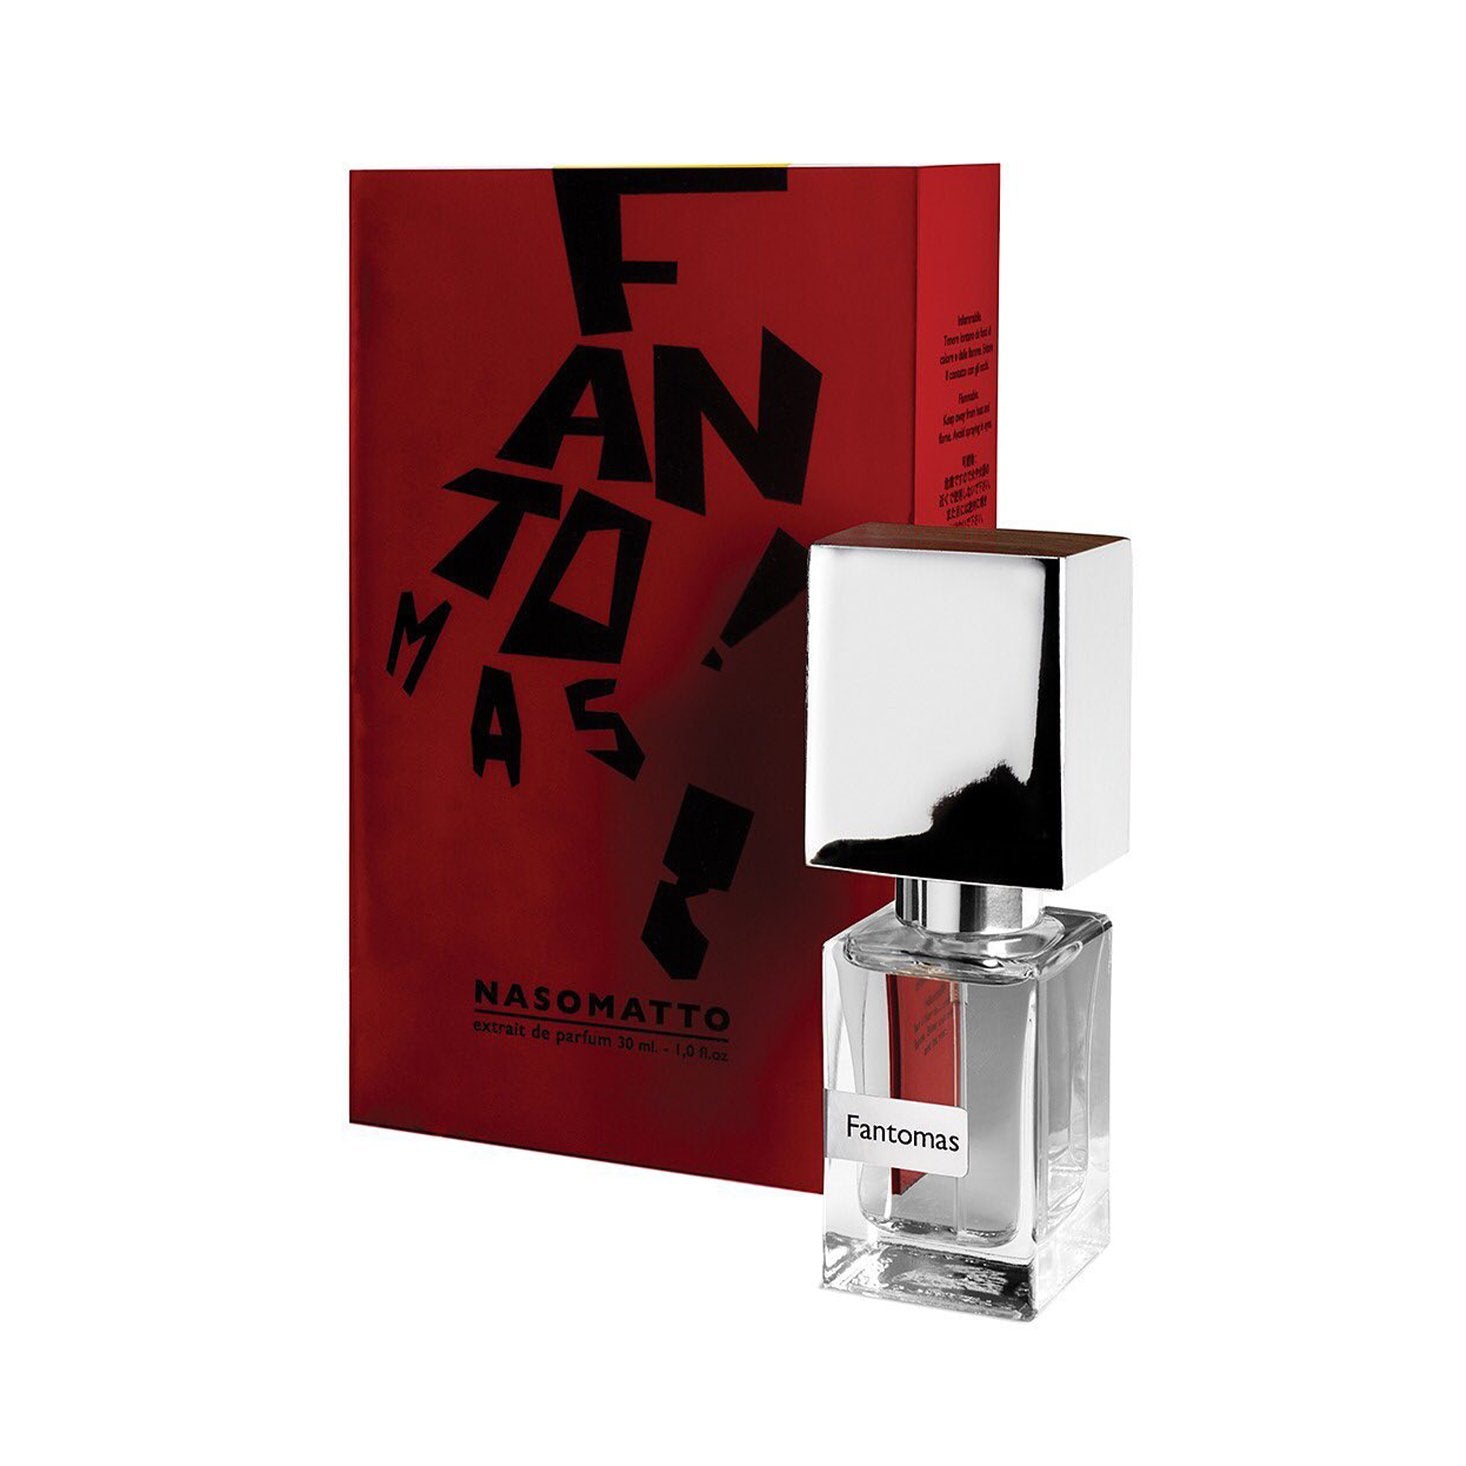 BEON.COM.AU Inspired by crime scenes from the Franco-Italian film Fantomas, starring Jean Marais and Louis de Funès, this Nasomatto fragrance is a true invitation to investigate, seek, explore. The cedar and calamus notes in the base blend with juicy raspberry notes in the heart: a creation full of twists an... Nasomatto at BEON.COM.AU